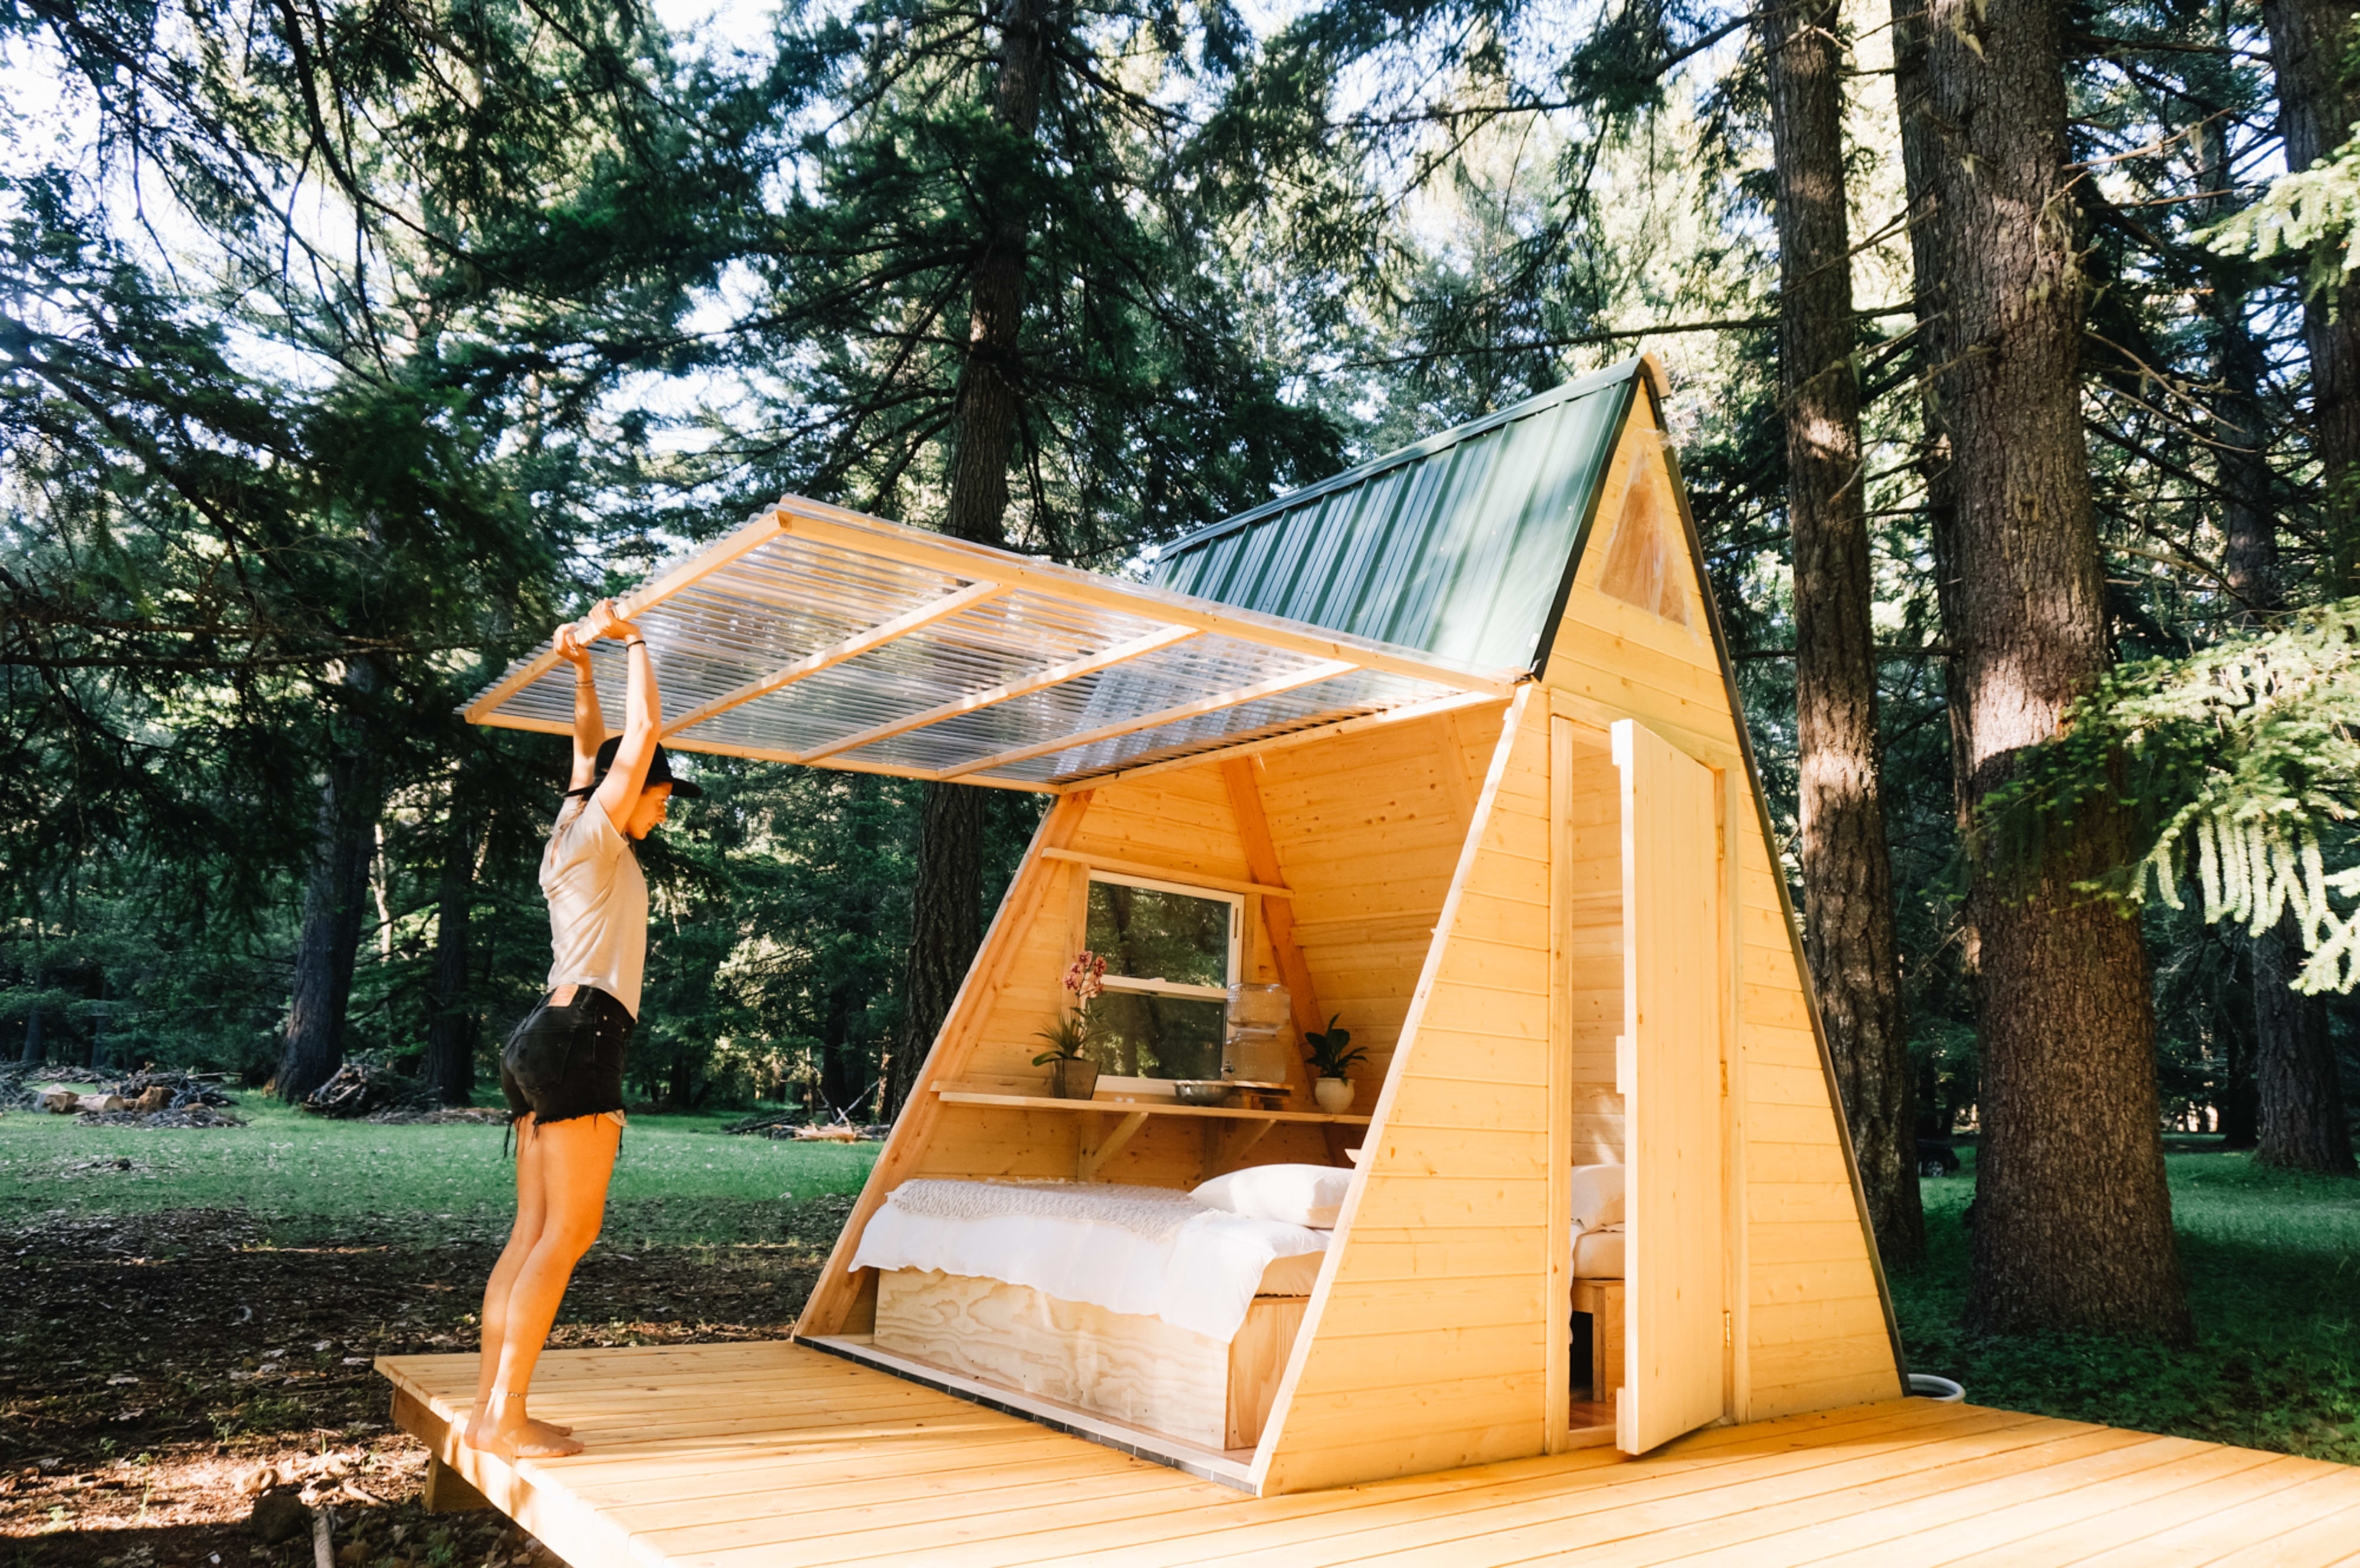 How to Build This A-Frame Cabin That Will Pay for Itself